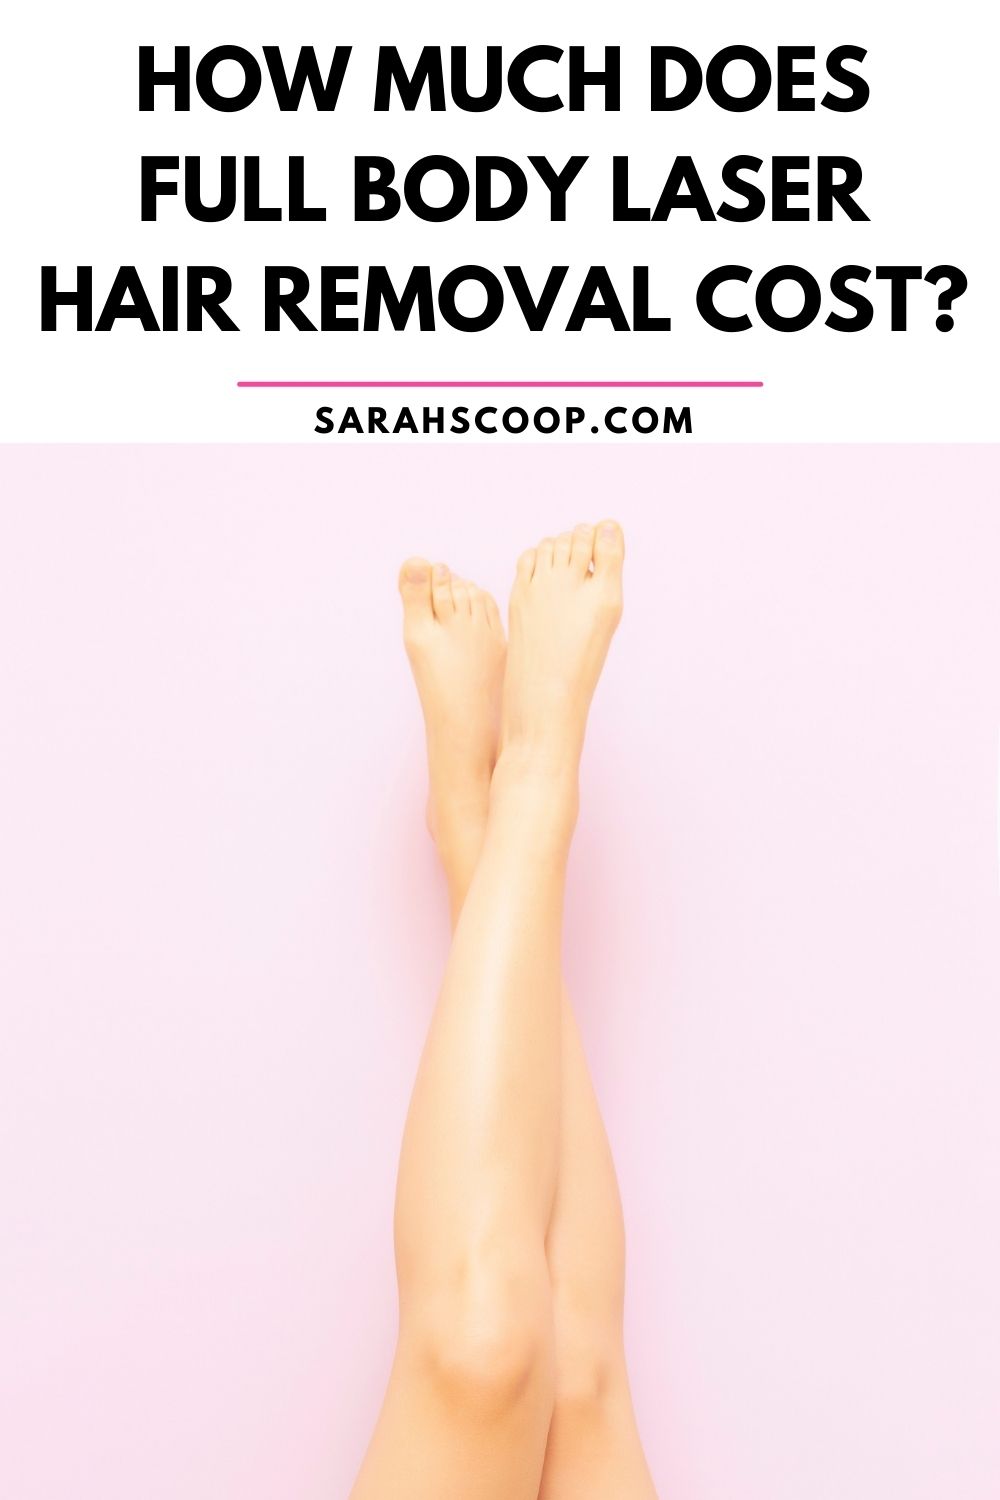 How Much Does Full Body Laser Hair Removal Cost? - Sarah Scoop